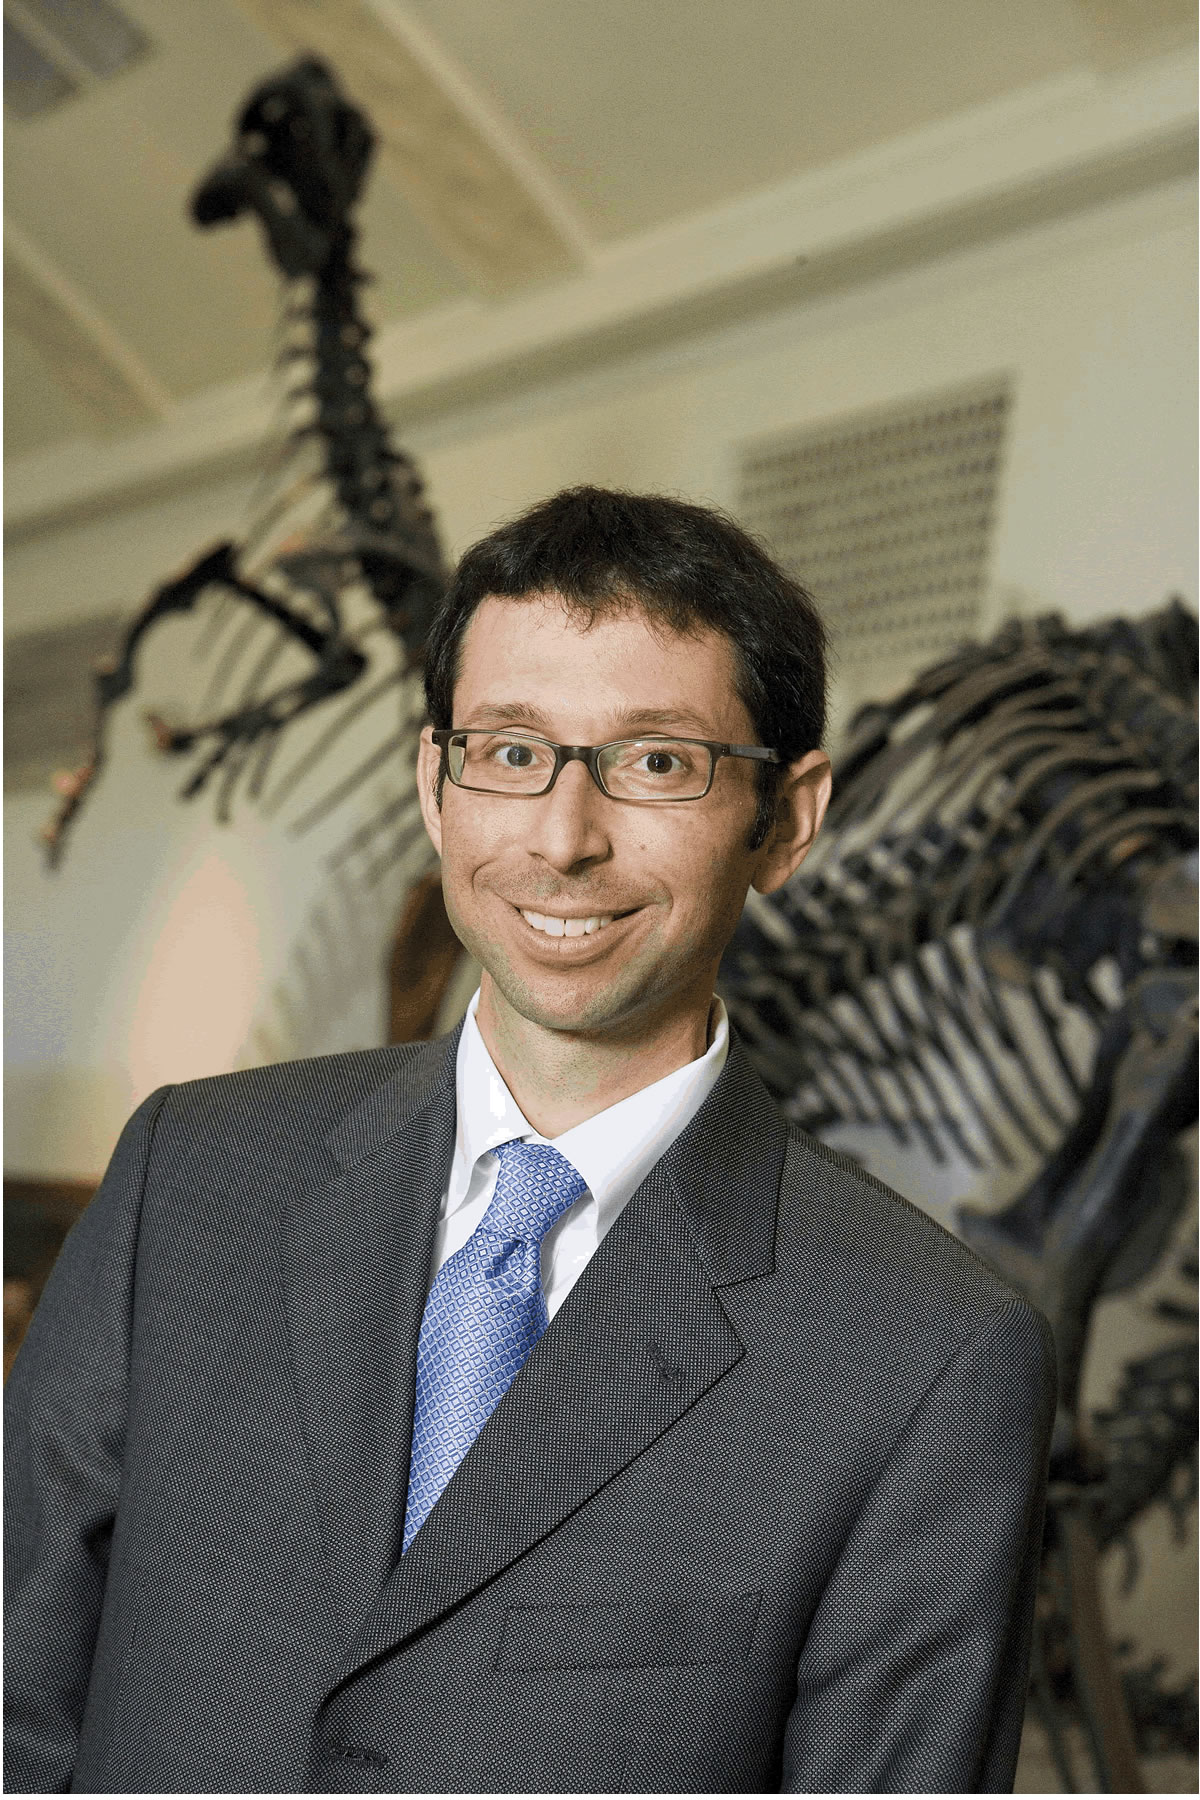 Chris Eisenberg, Capital Campaign Manager for the Utah Museum of Natural History.